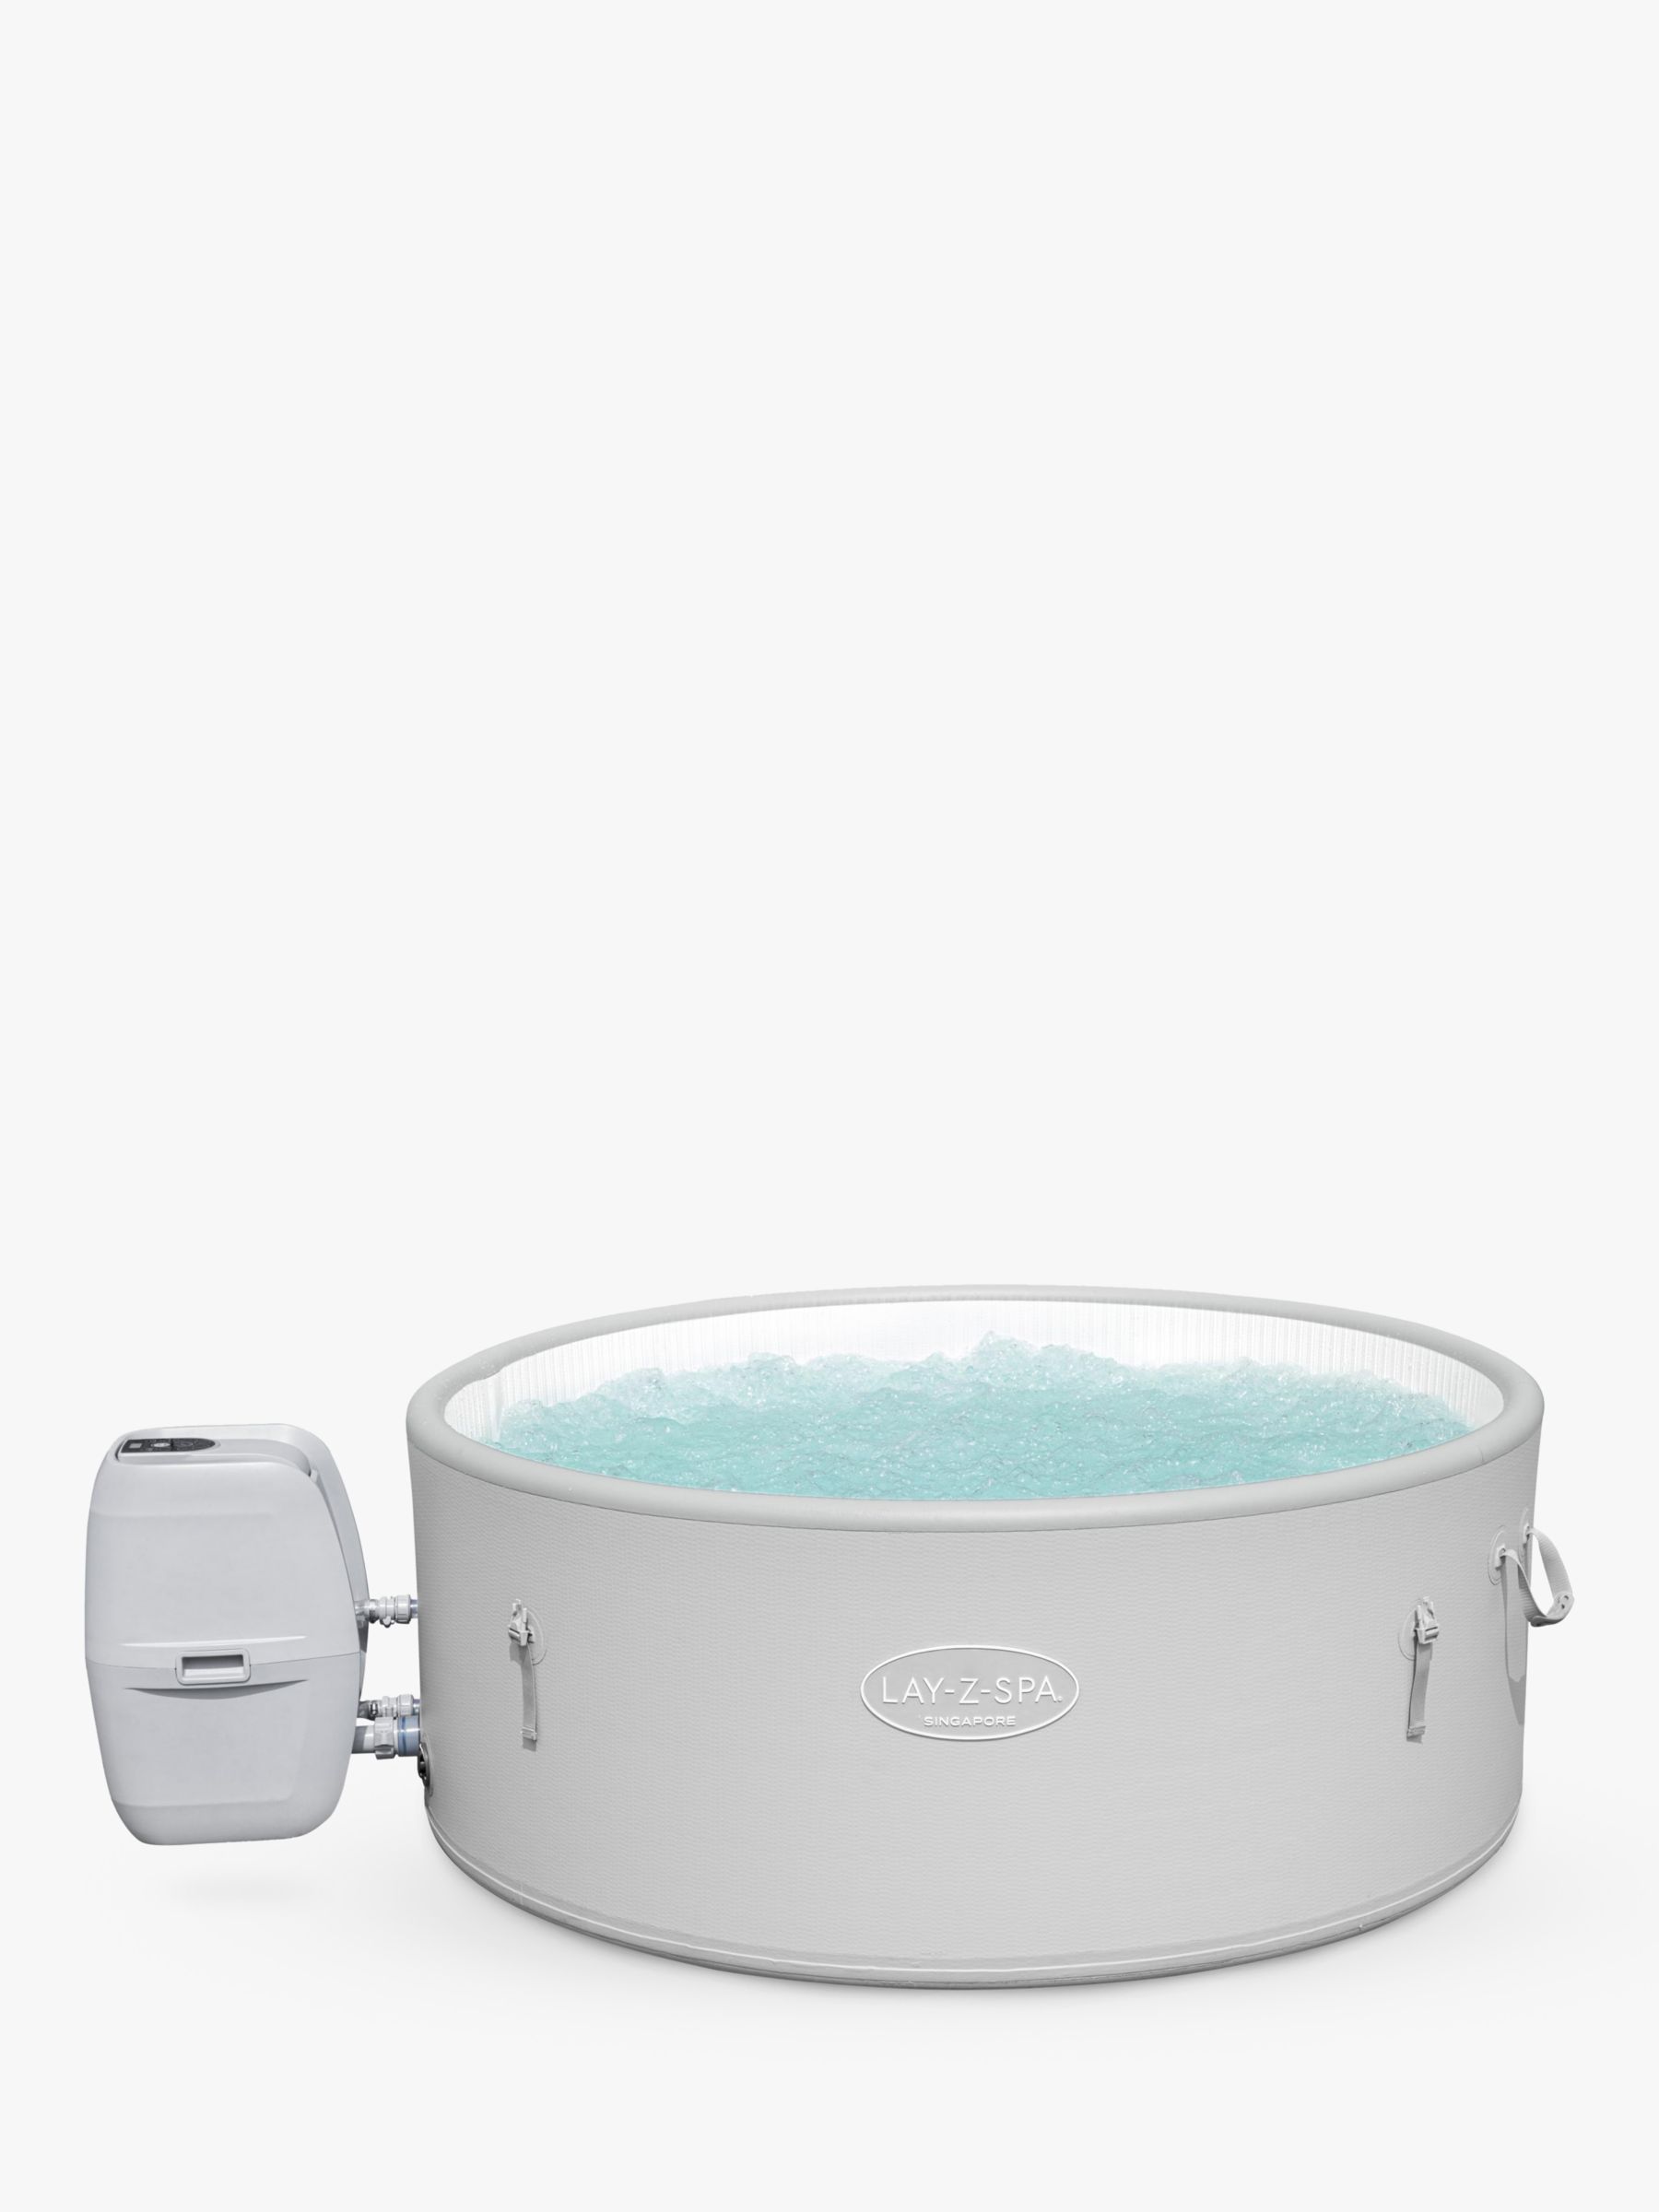 Photo of Lay-z-spa singapore airjet plus inflatable round hot tub & clearwater spa chemical starter kit 5 person